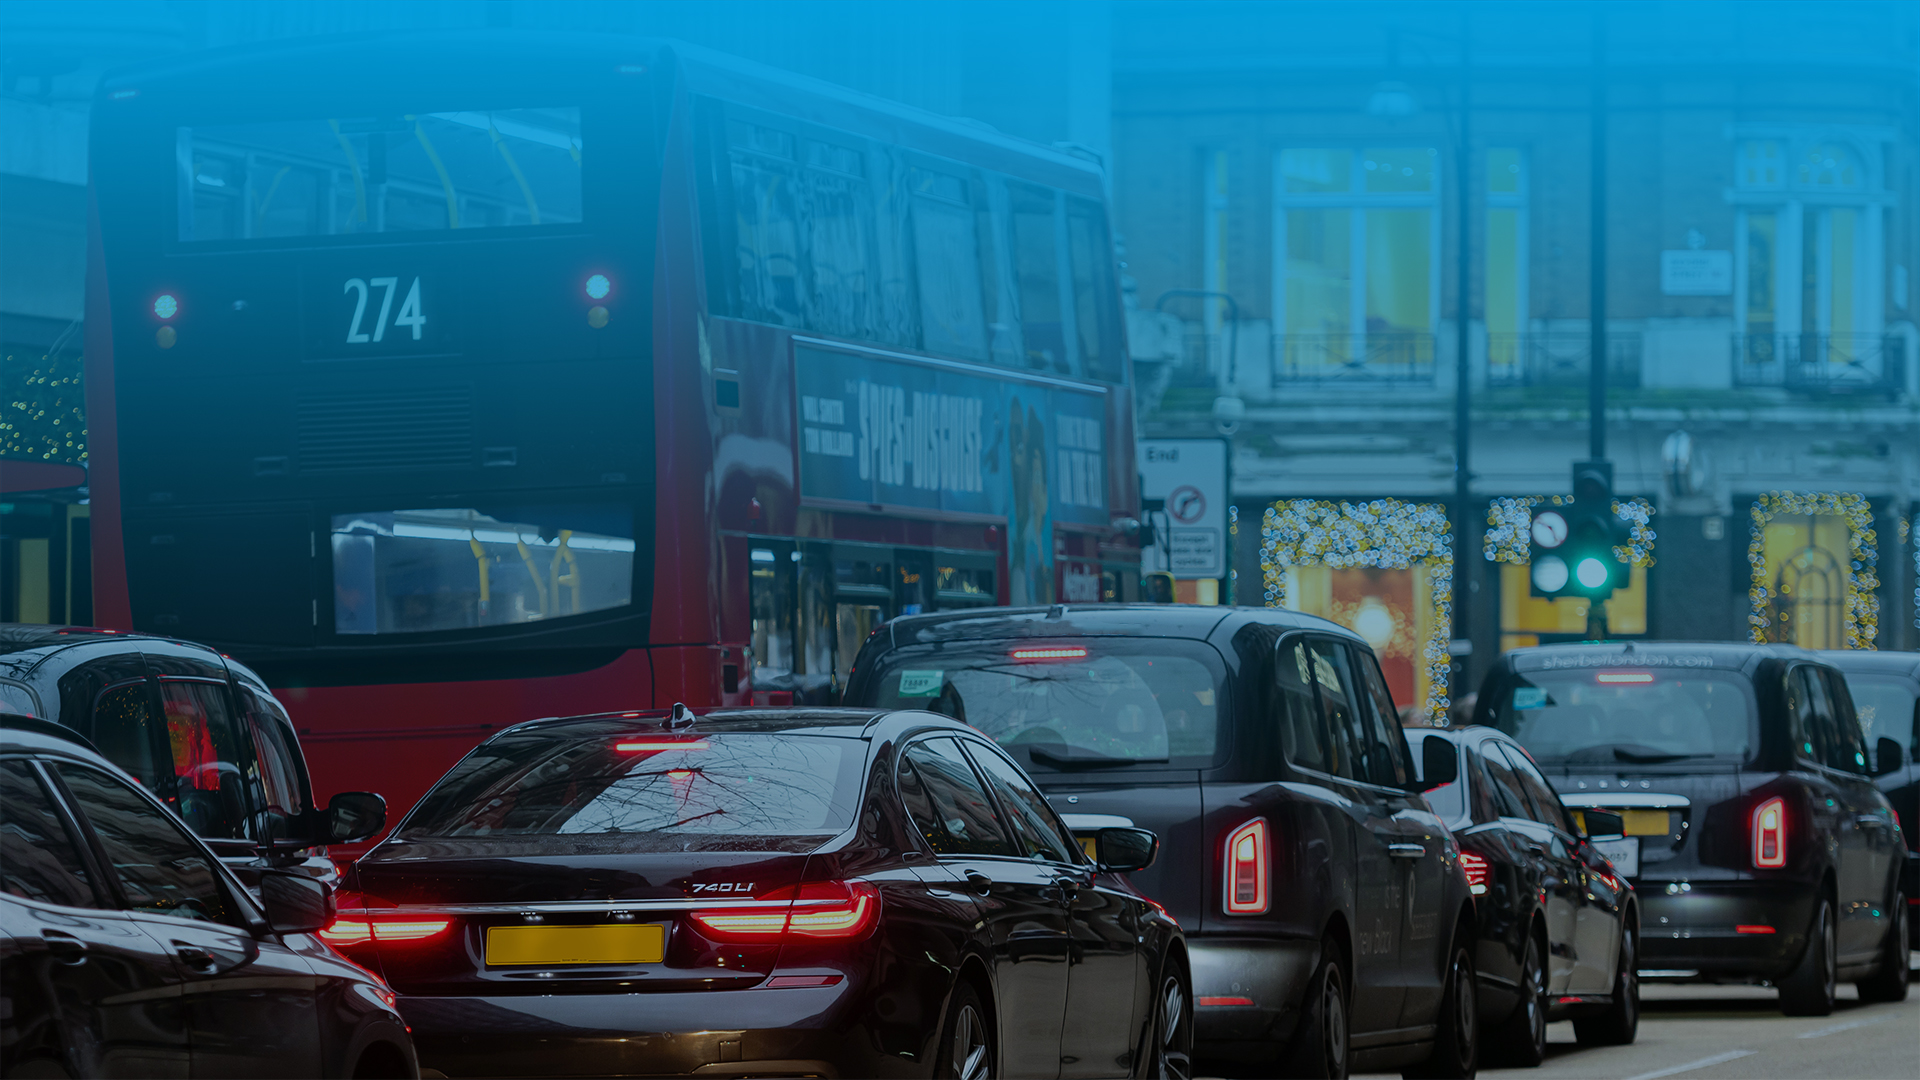 Image of traffic in London